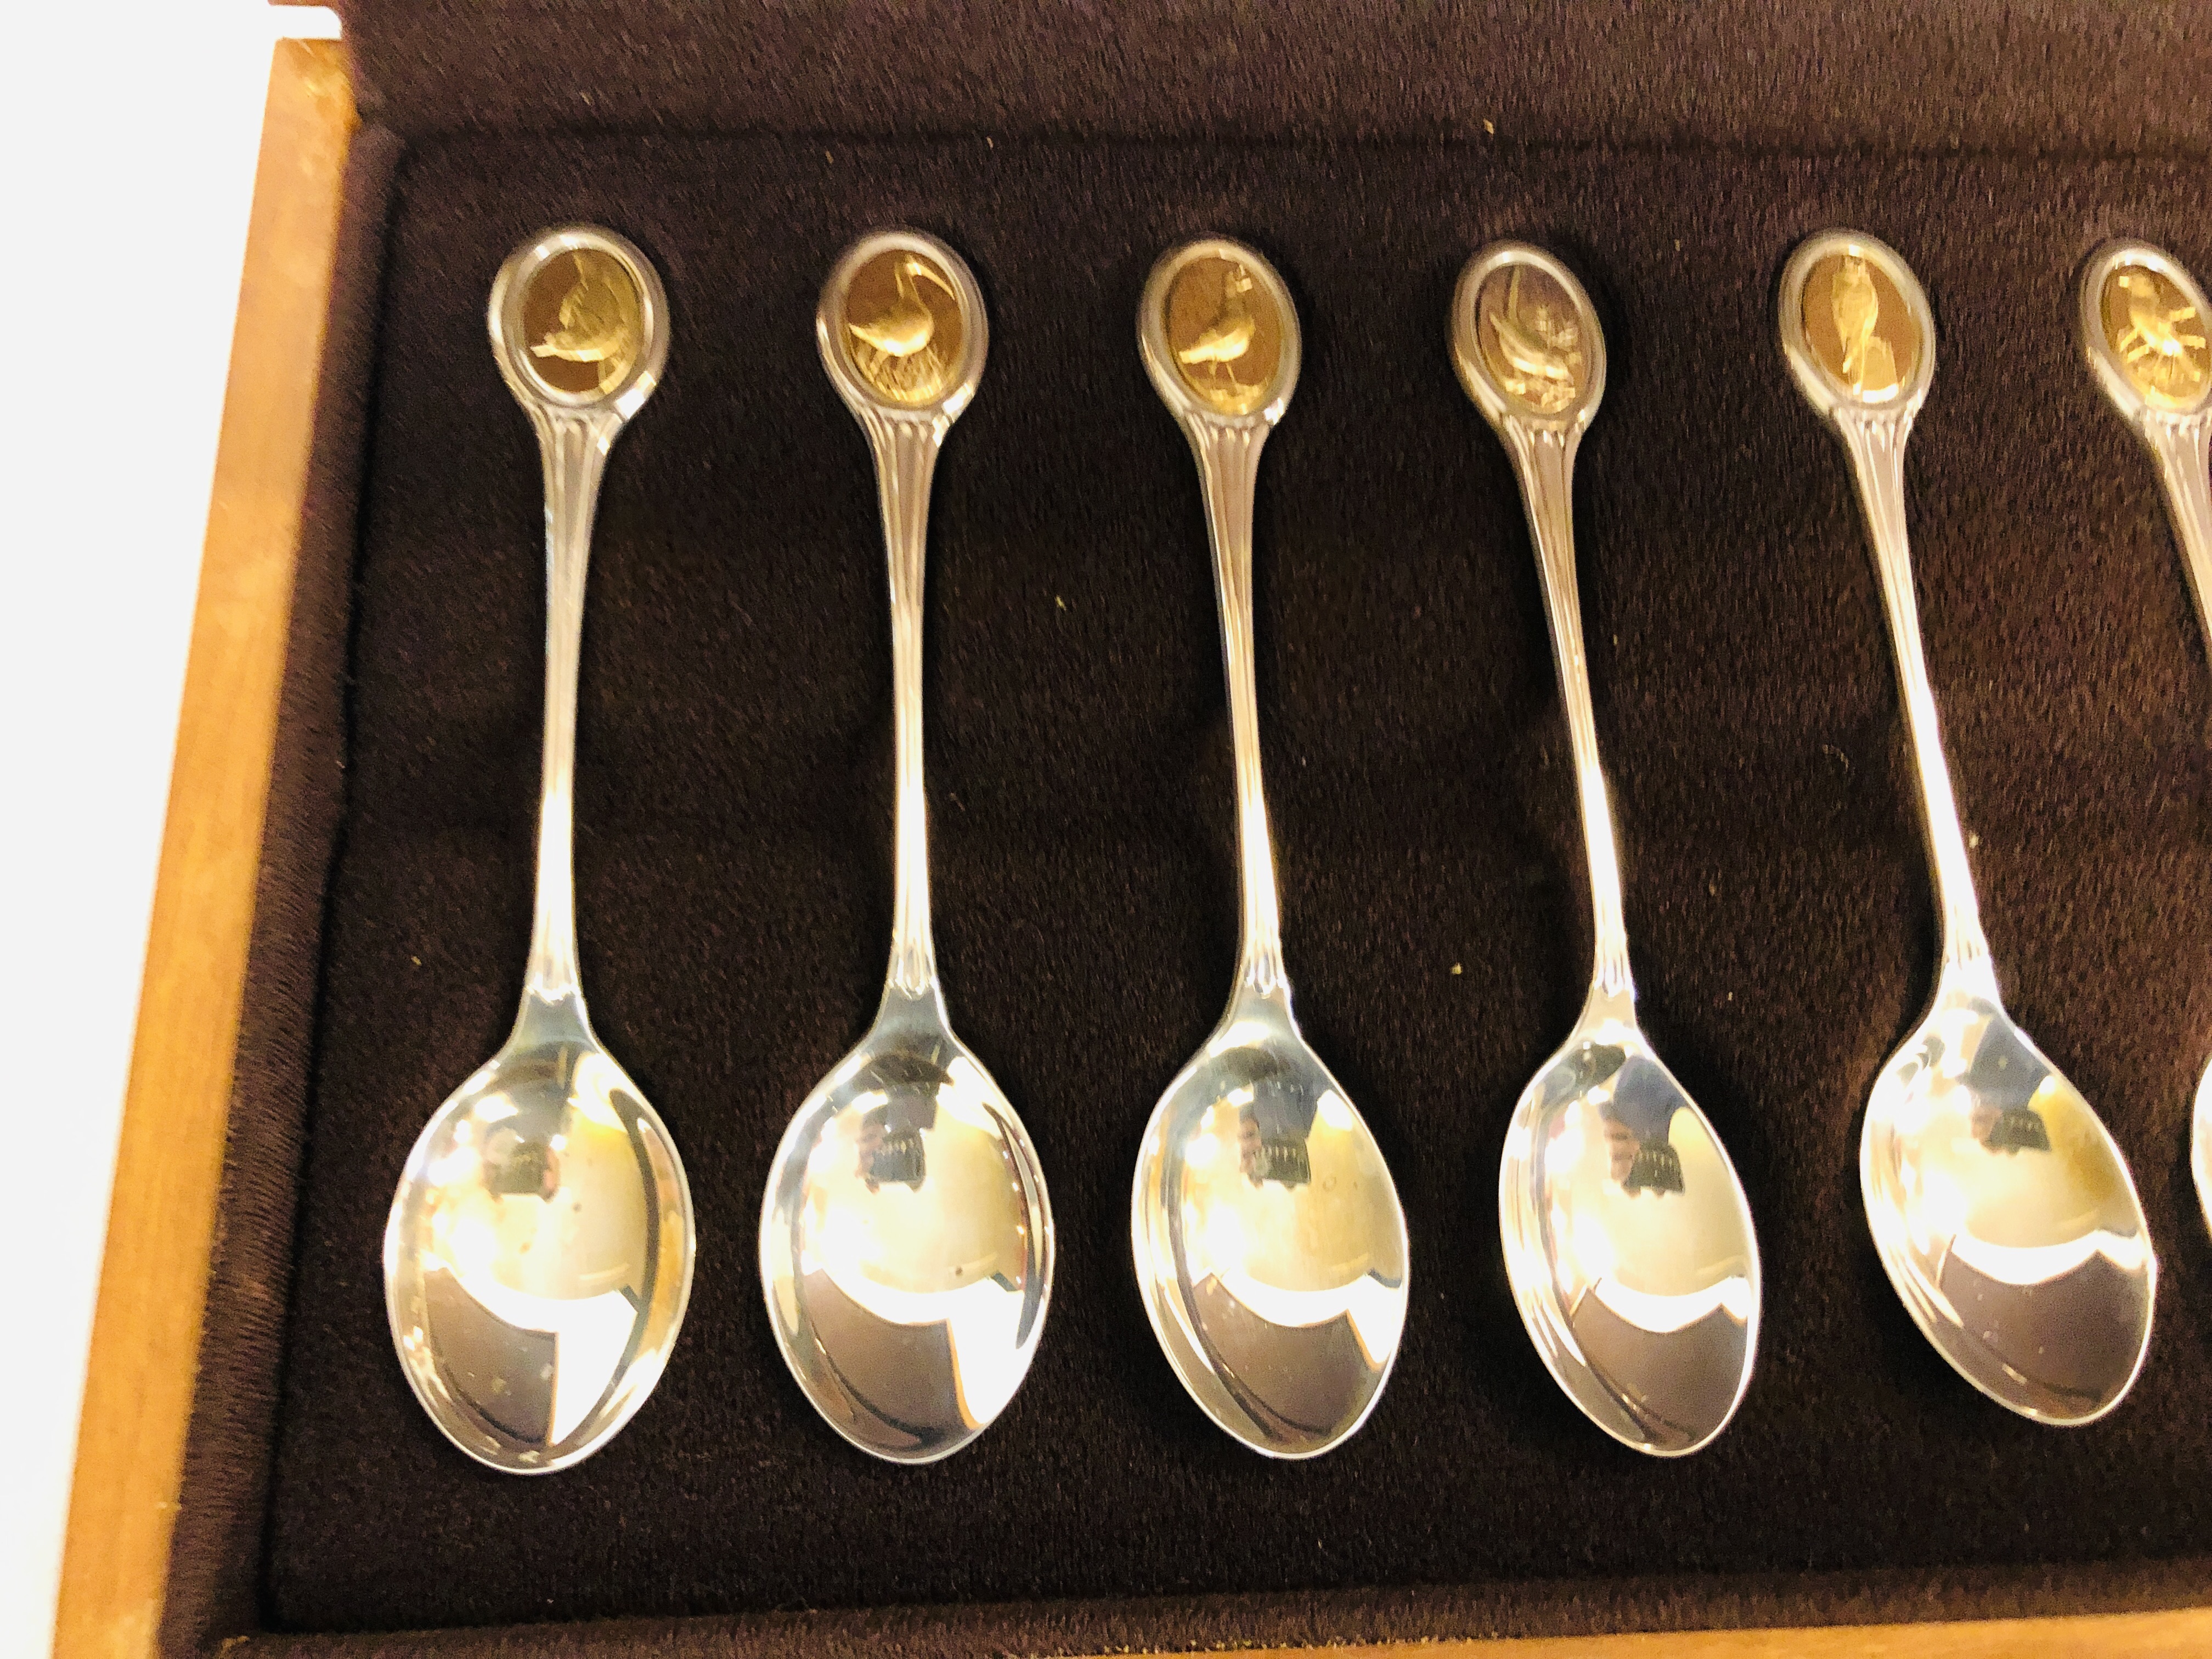 RSPB "THE ROYAL SOCIETY FOR THE PROTECTION OF BIRDS" CASED SET OF TWELVE SILVER SPOONS - Image 2 of 5